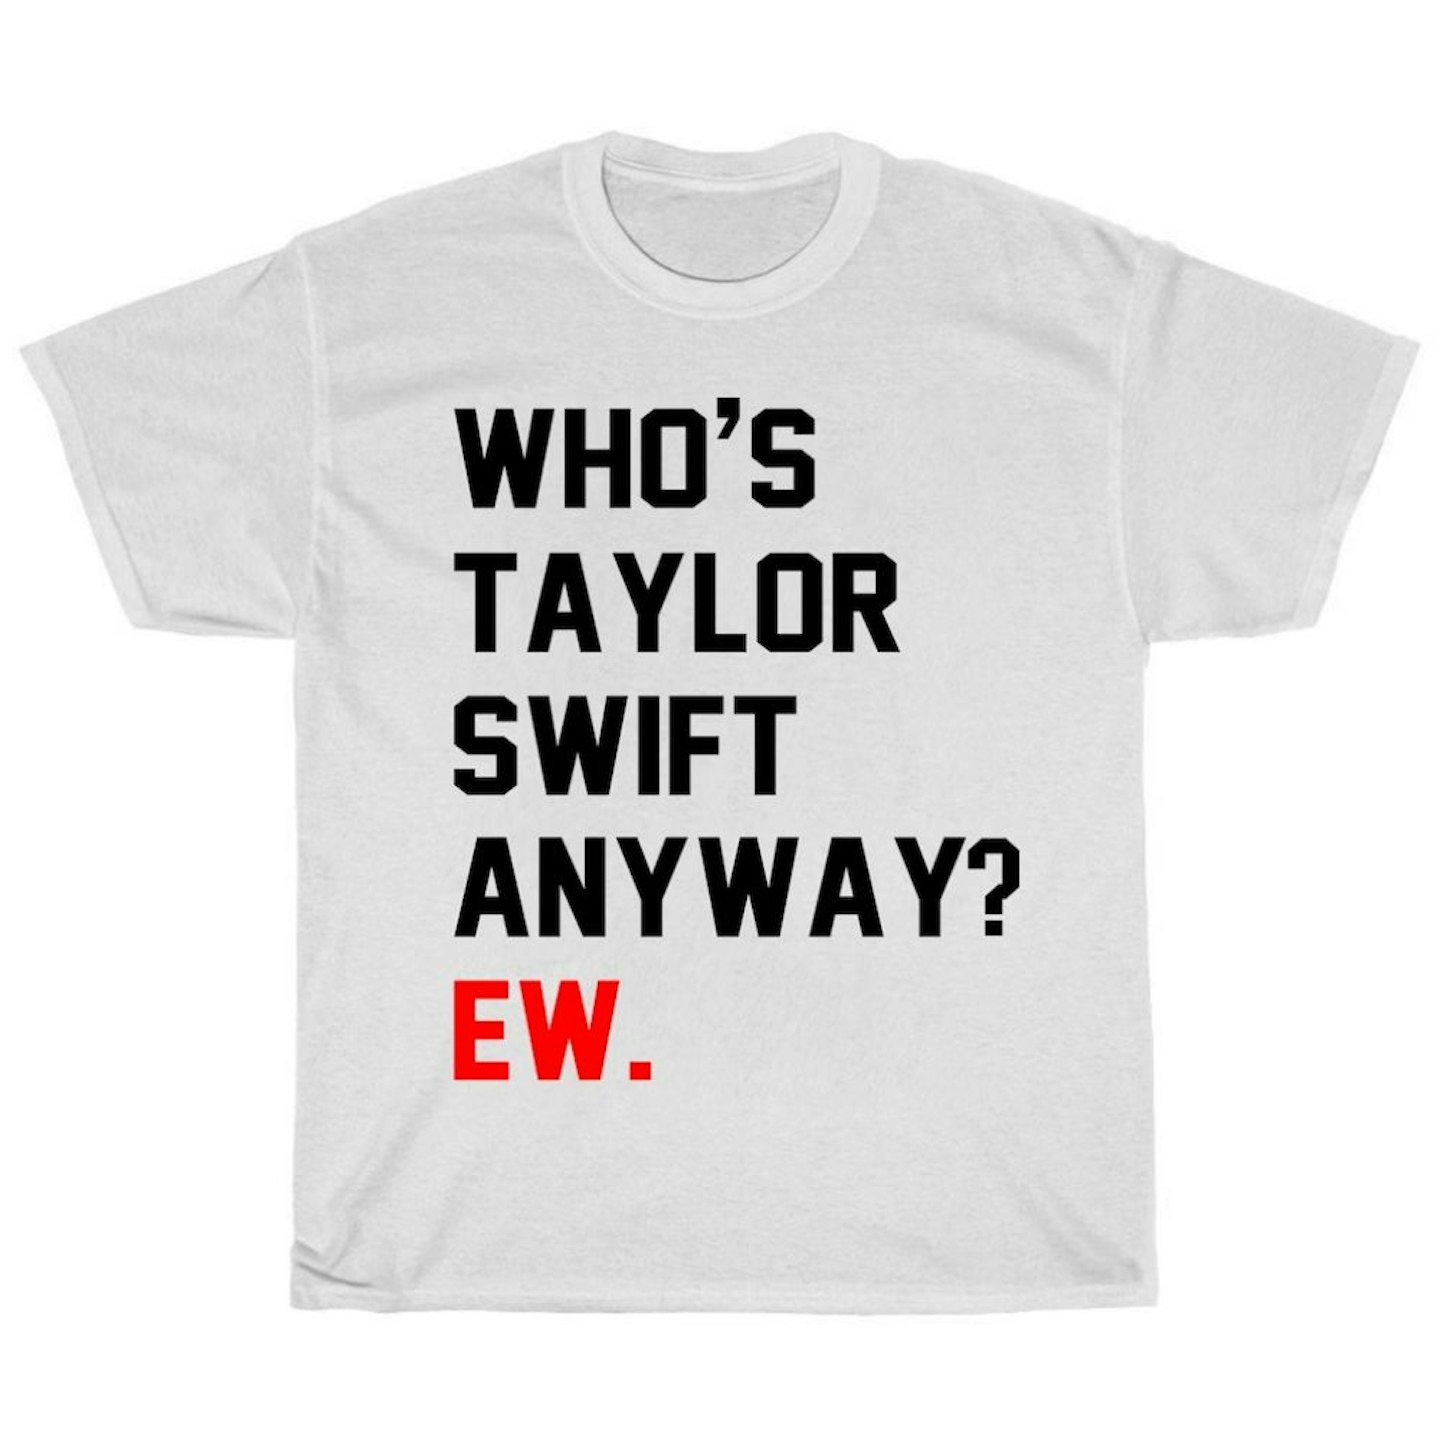 Who’s Taylor Swift Anyway? Ew. Shirt